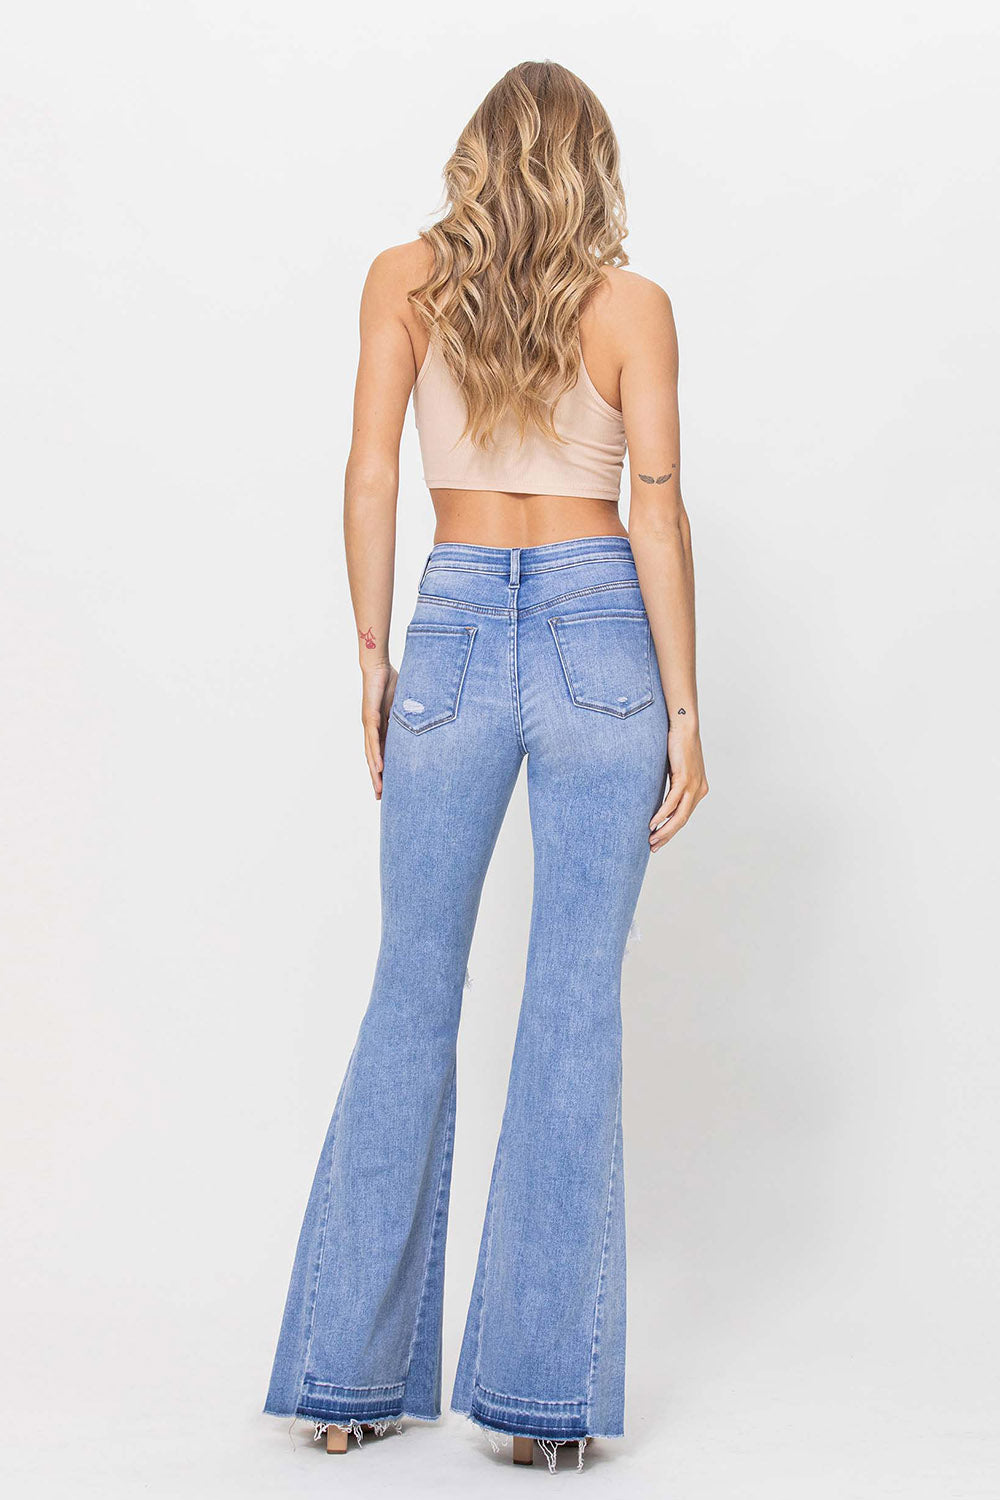 Last Reel - High Rise Flare Jeans with Side Panels and Mixed Step Hem